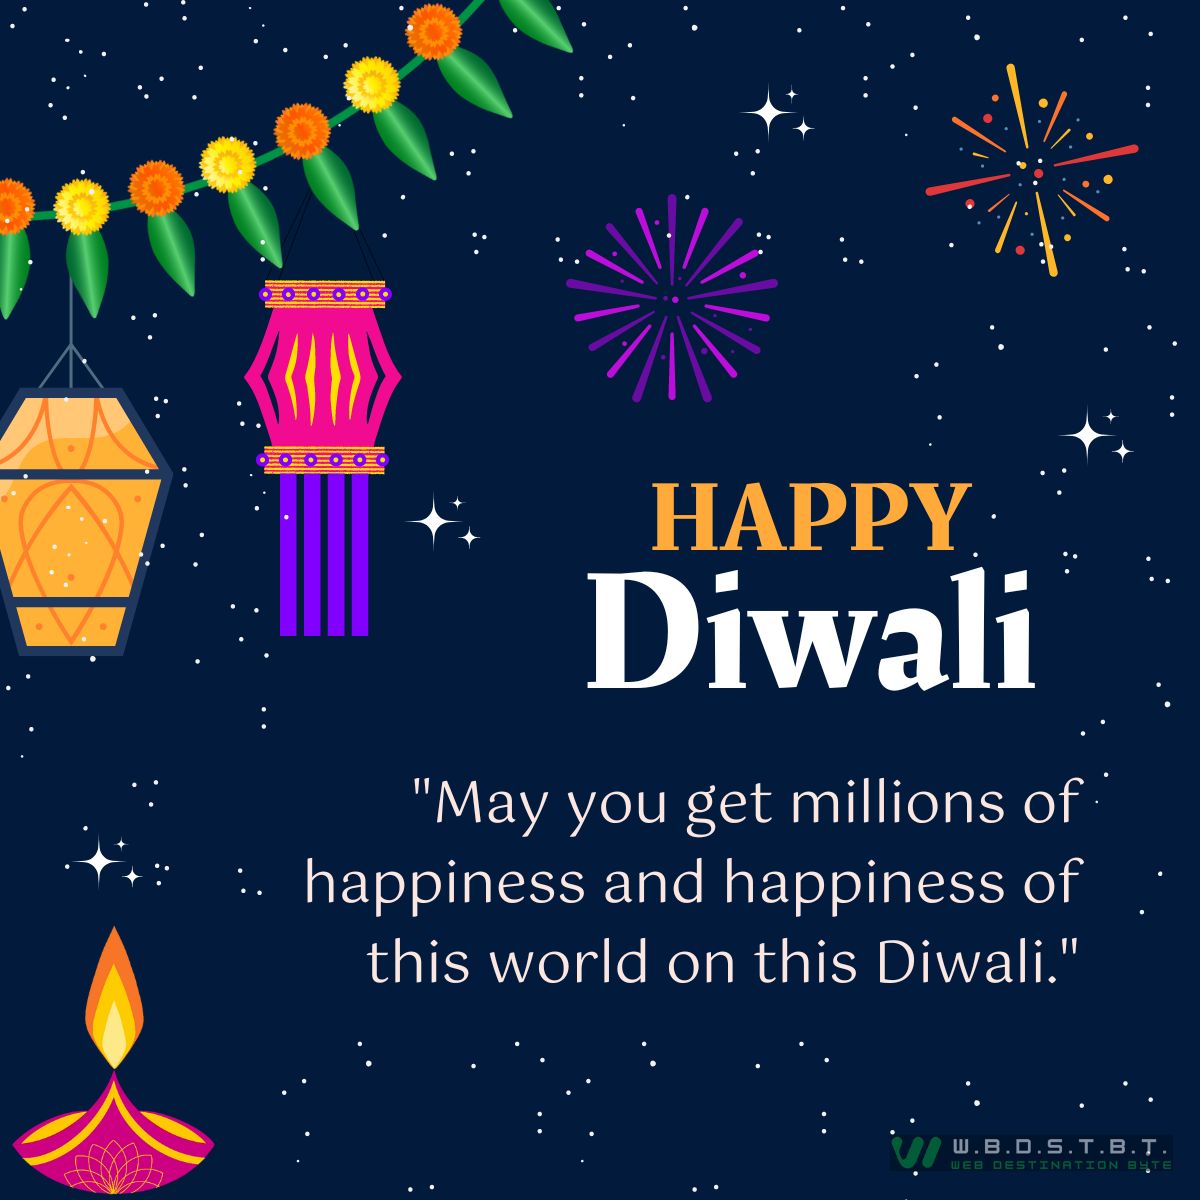 "May you get millions of happiness and happiness of this world on this Diwali."